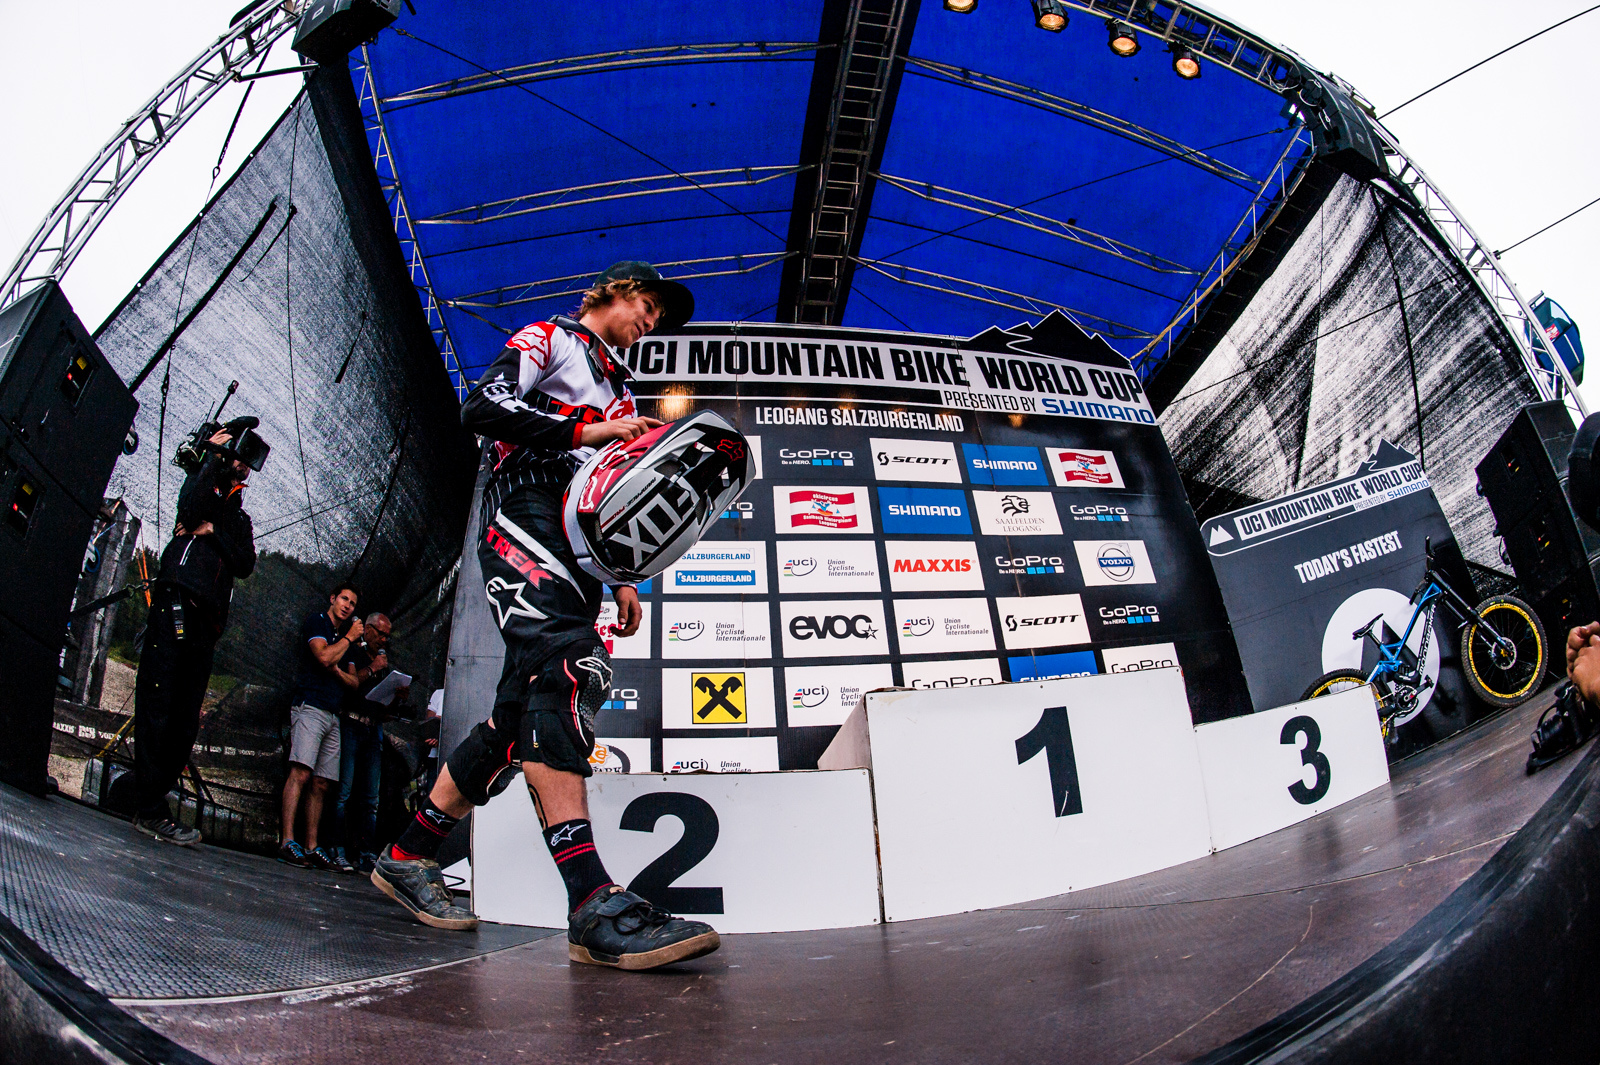 Perhaps outshined by Gwin's successes, Greenland too made the podium without a chain at Leogang.